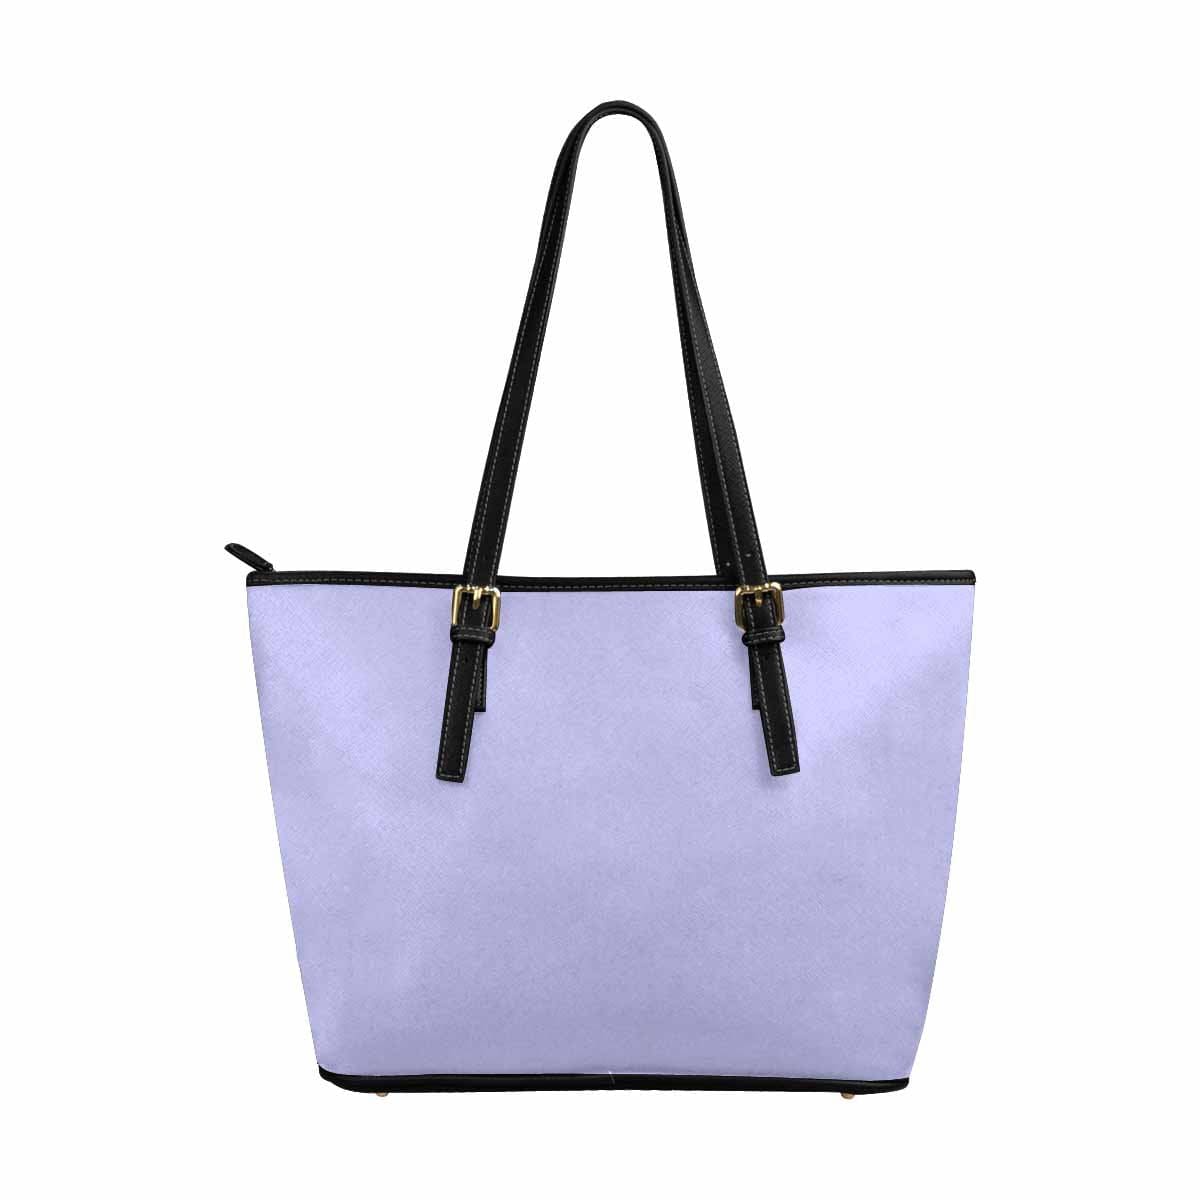 Large Leather Tote Shoulder Bag - Periwinkle Purple - Bags | Leather Tote Bags